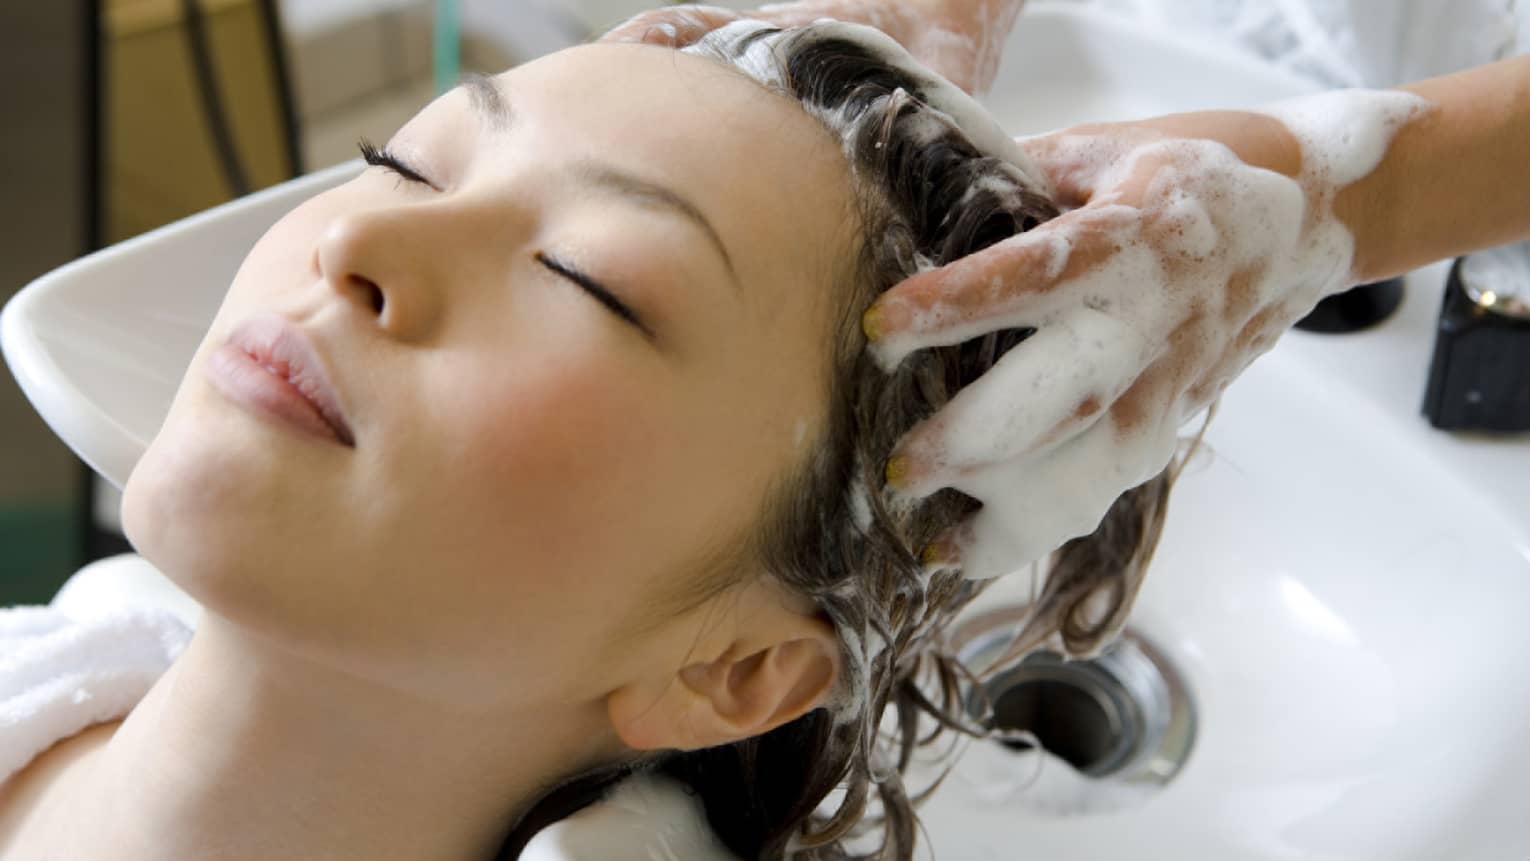 Woman closes eyes and leans back against sink as hands massage shampoo into her scalp